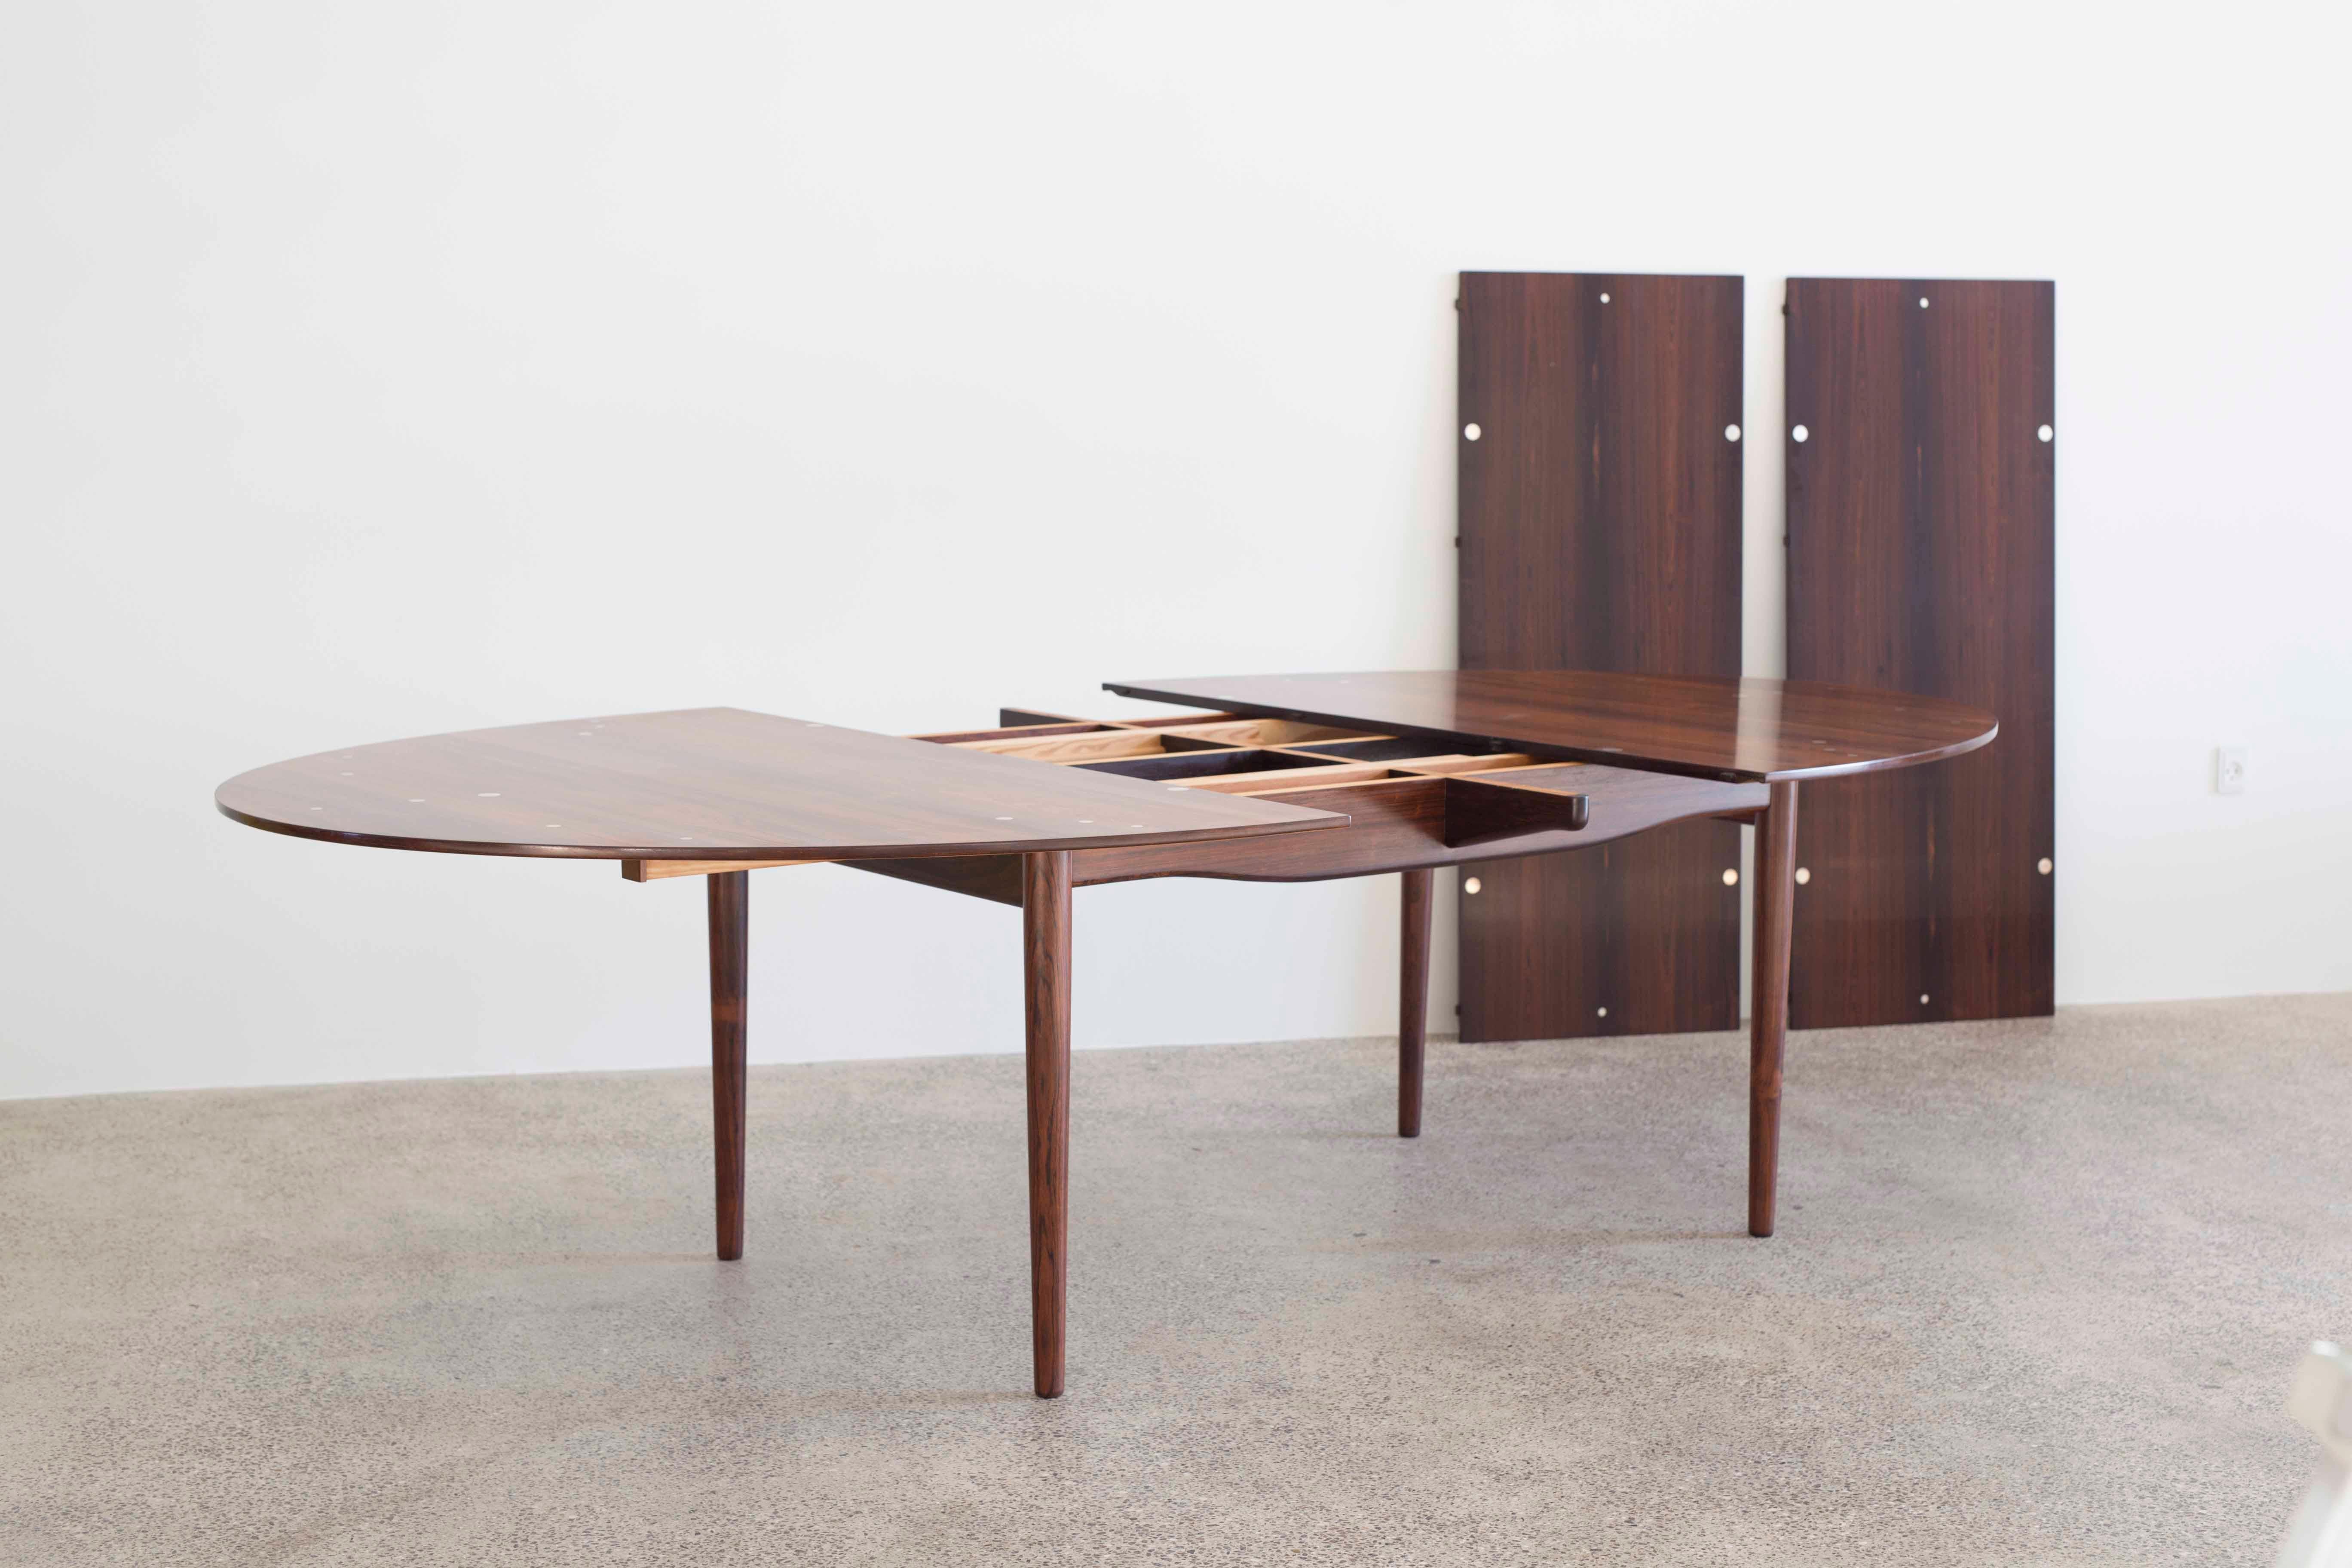 Finn Juhl Judas table in Brazilian rosewood with 30 sterling silver inlays in the main table. Including two extension leaves.
Designed 1948 and manufactured by cabinetmaker Niels Vodder, Denmark.
Measures: W 200/310 x D 140cm x H 72.5 cm.

 